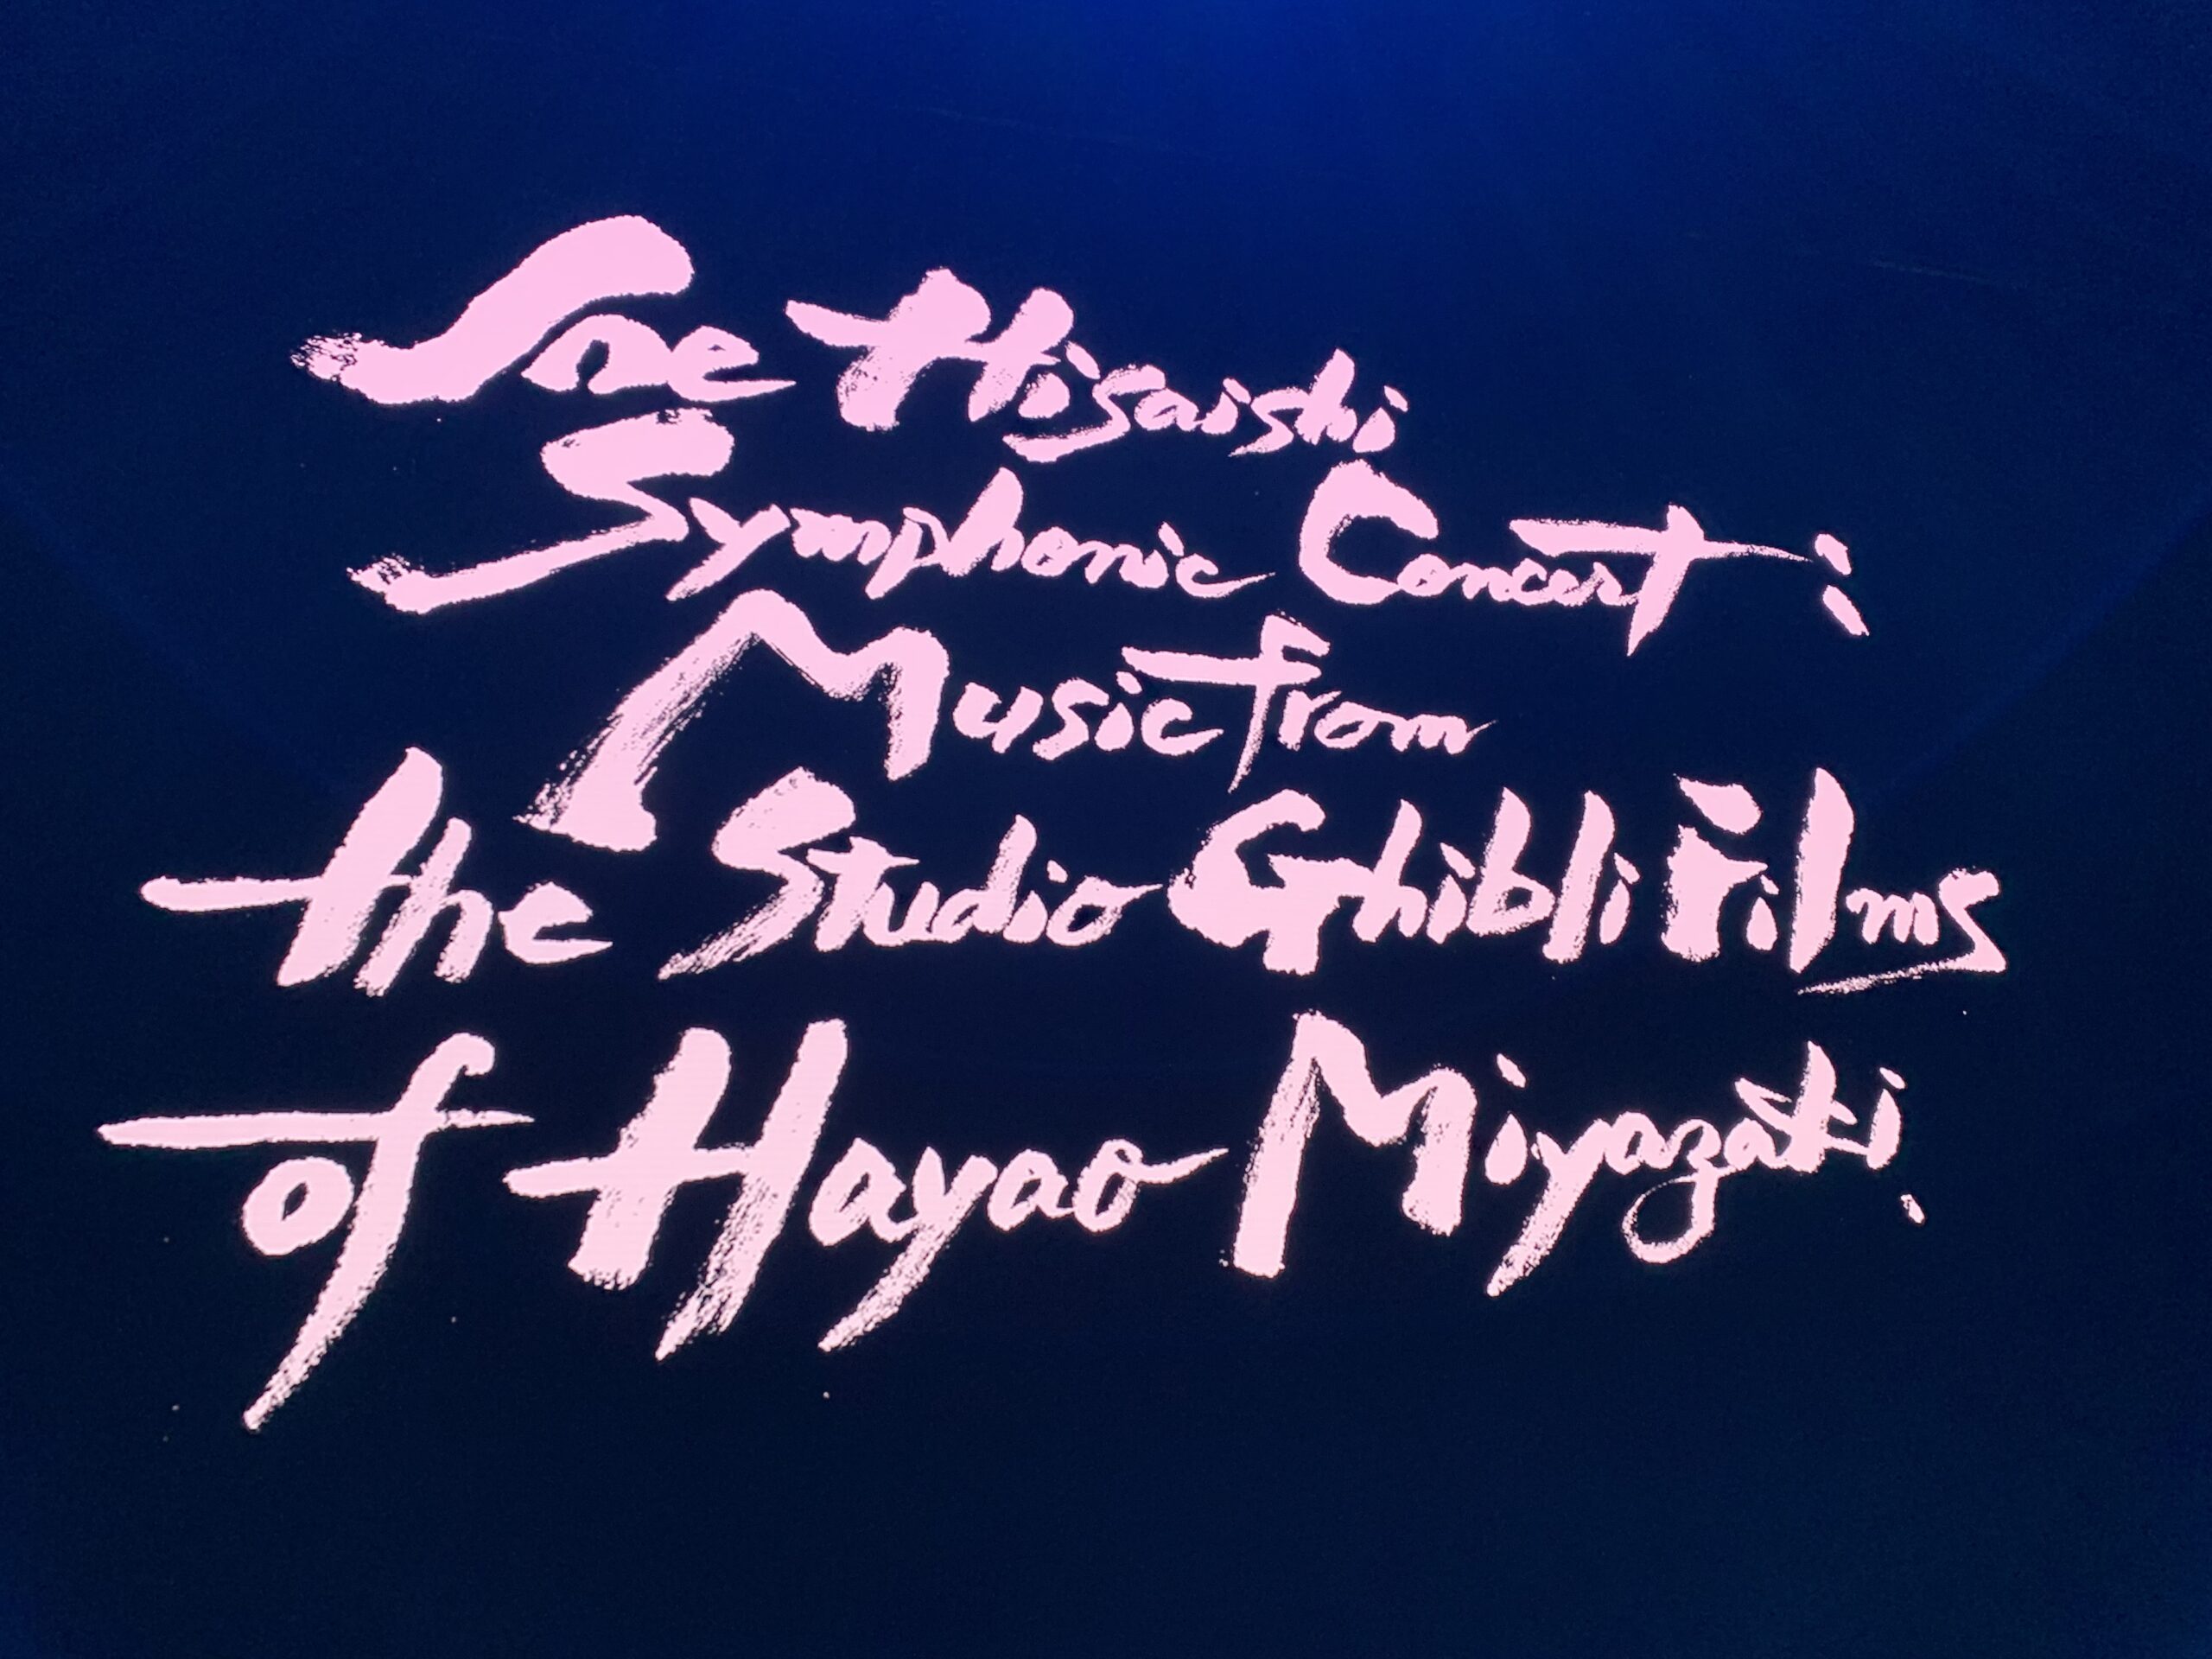 Black screen with pink letters that say Joe Hisaishi Symphonic Concert: Music from the Studio Ghibli Films of Hayao Miyazaki